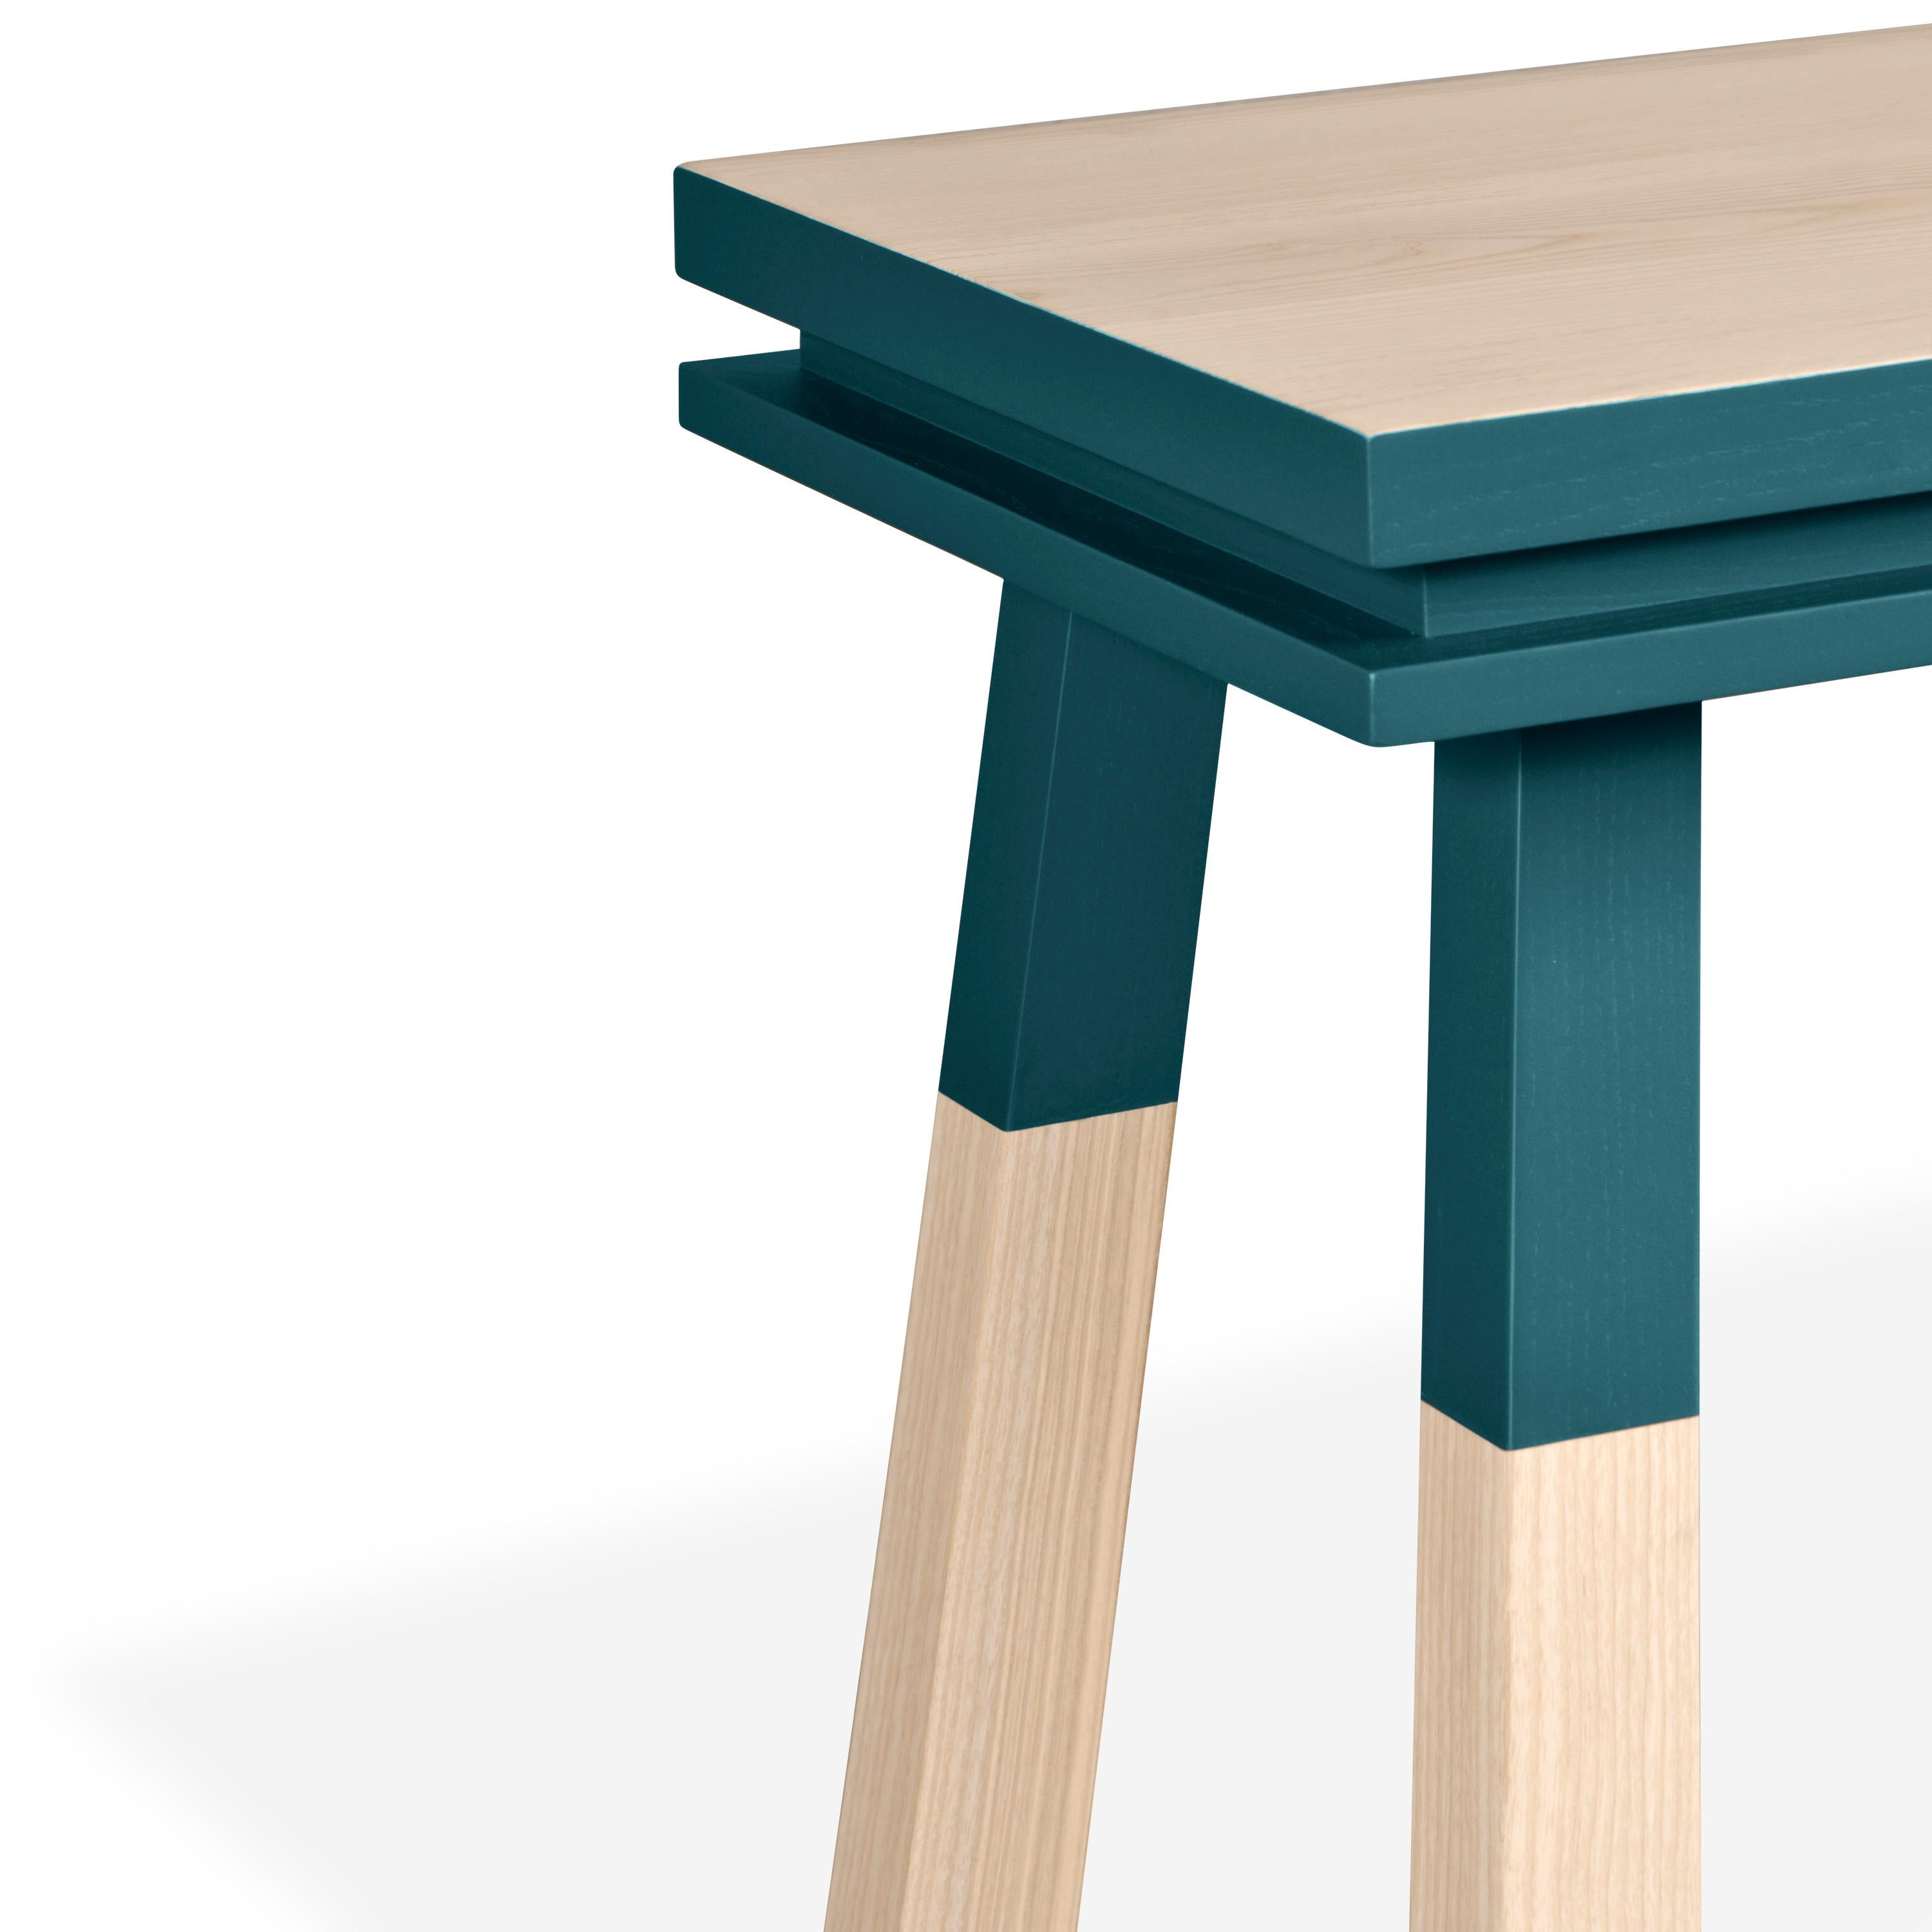 Sea blue writing table in 11 colours design by Eric Gizard, Paris - French craft For Sale 1